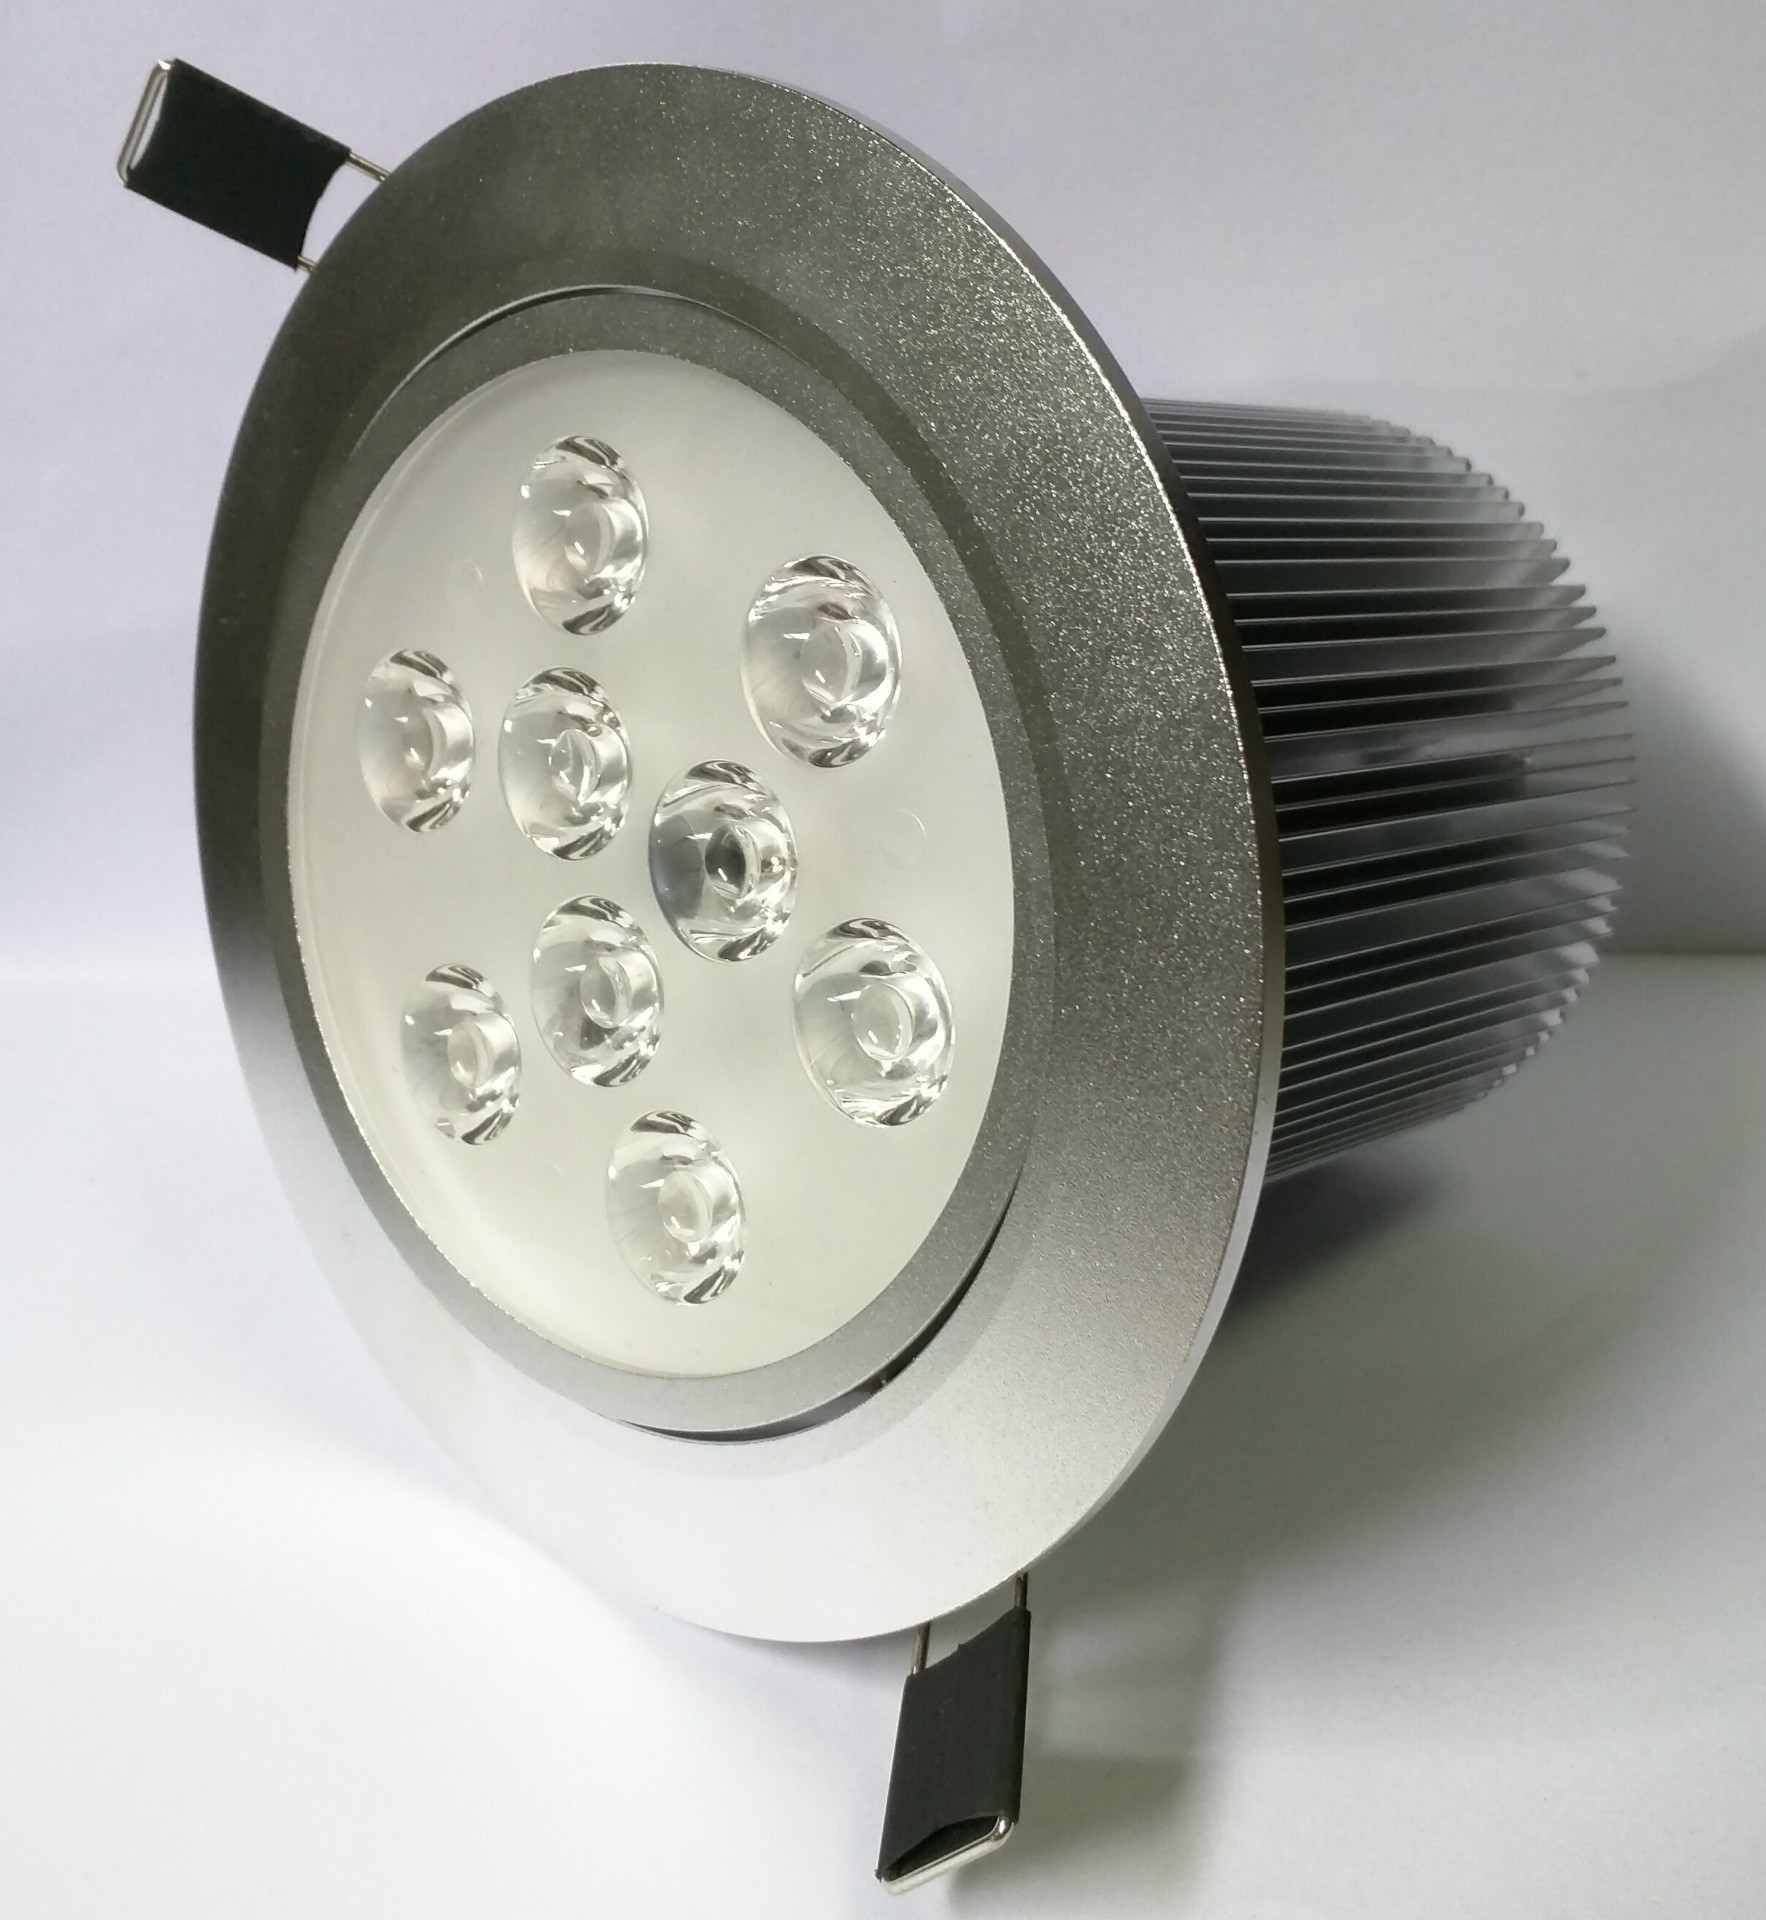 Directional 9W (Nine 1 watt) LED Downlight with Driver Included Silver Finish